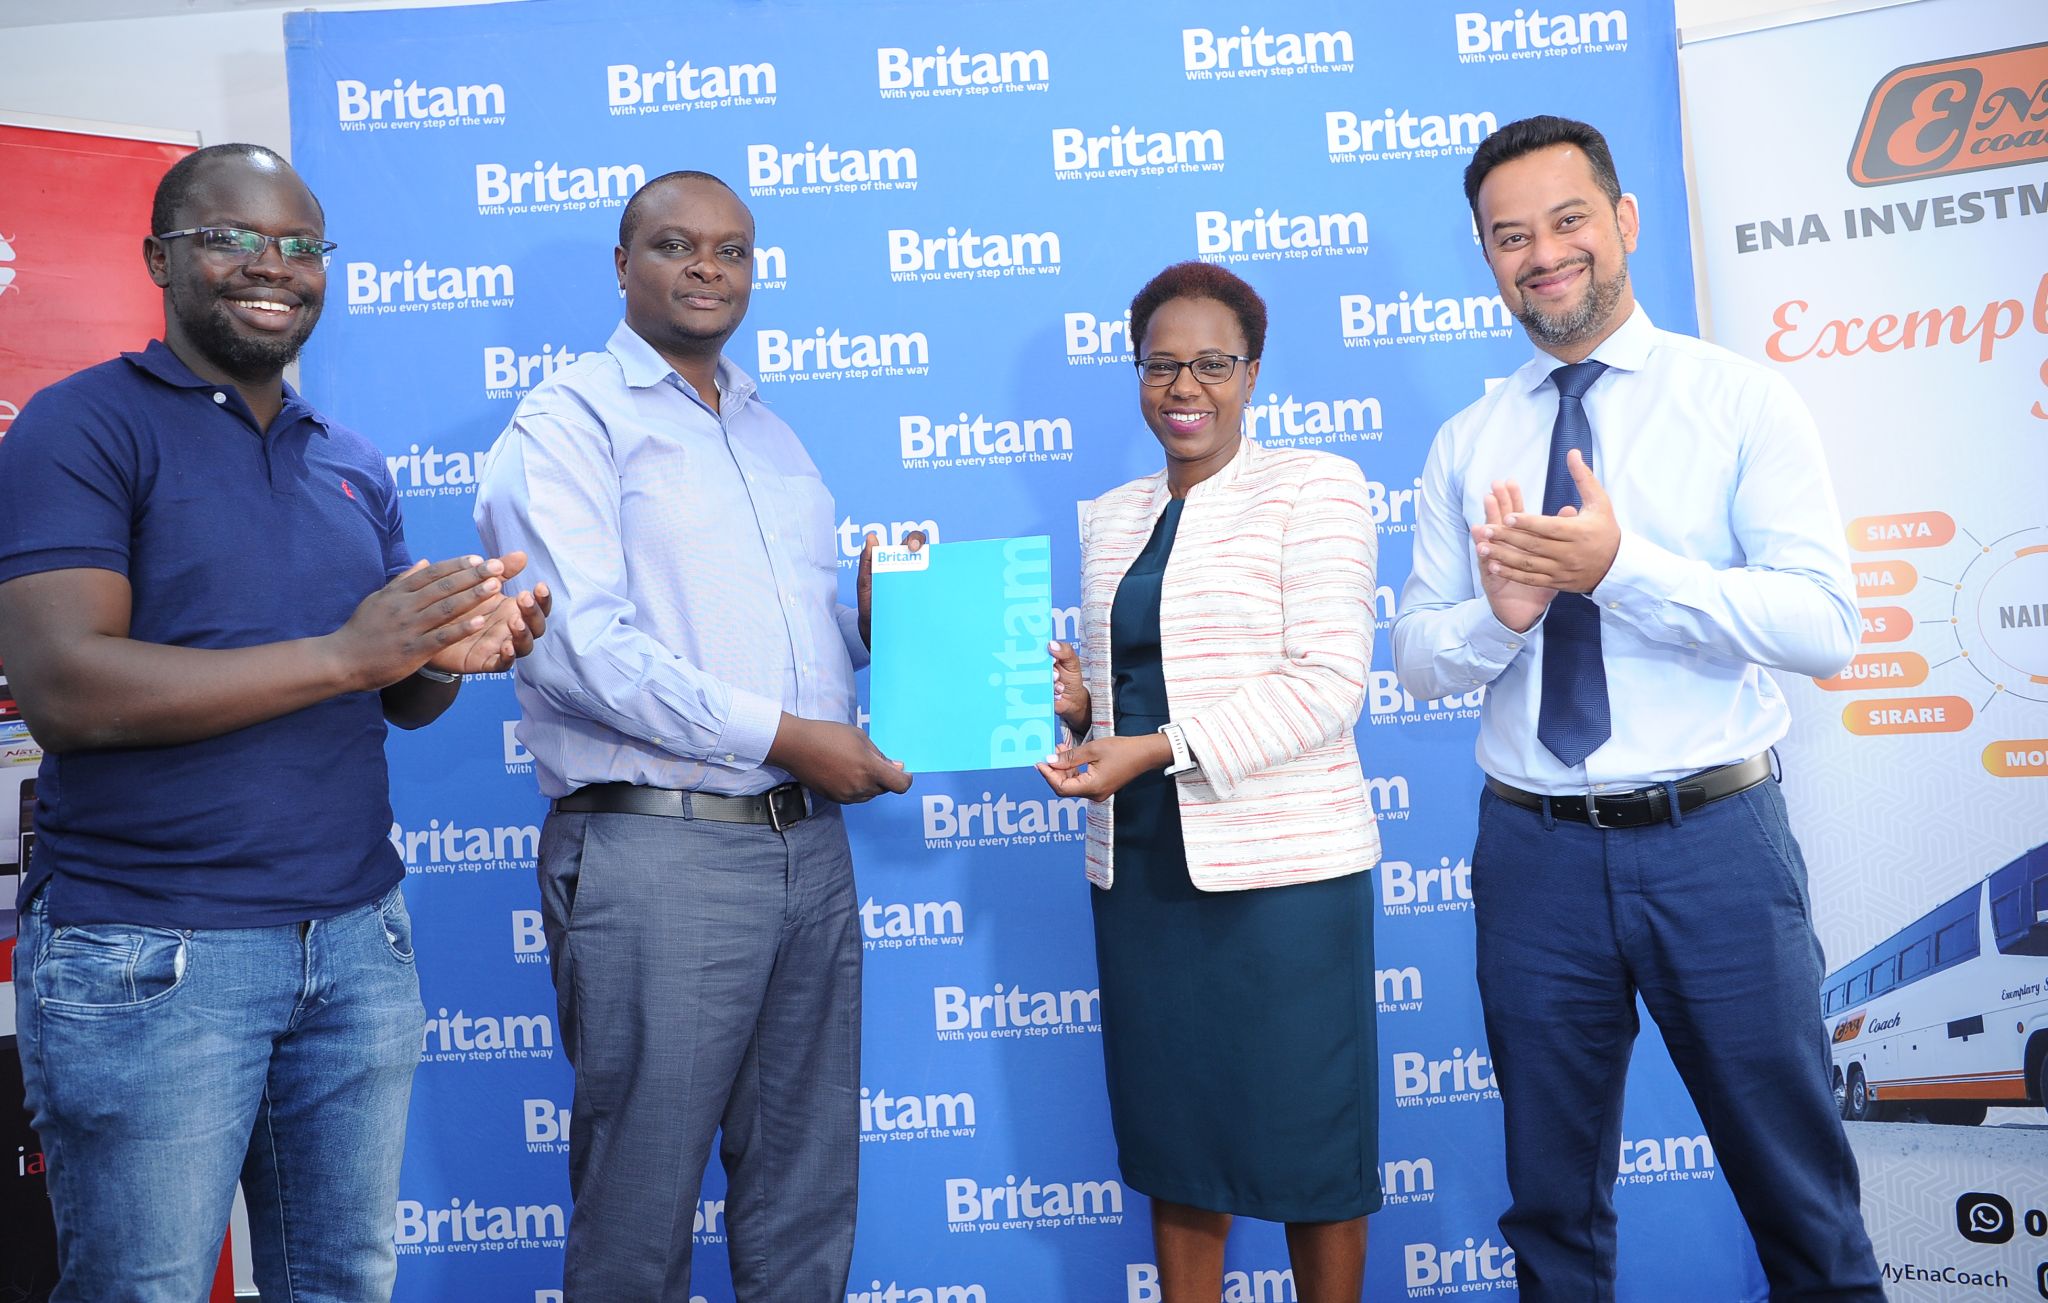 Britam Partners with Voltic to roll-out a Digital Personal Accident Cover to ENA Coach Customer